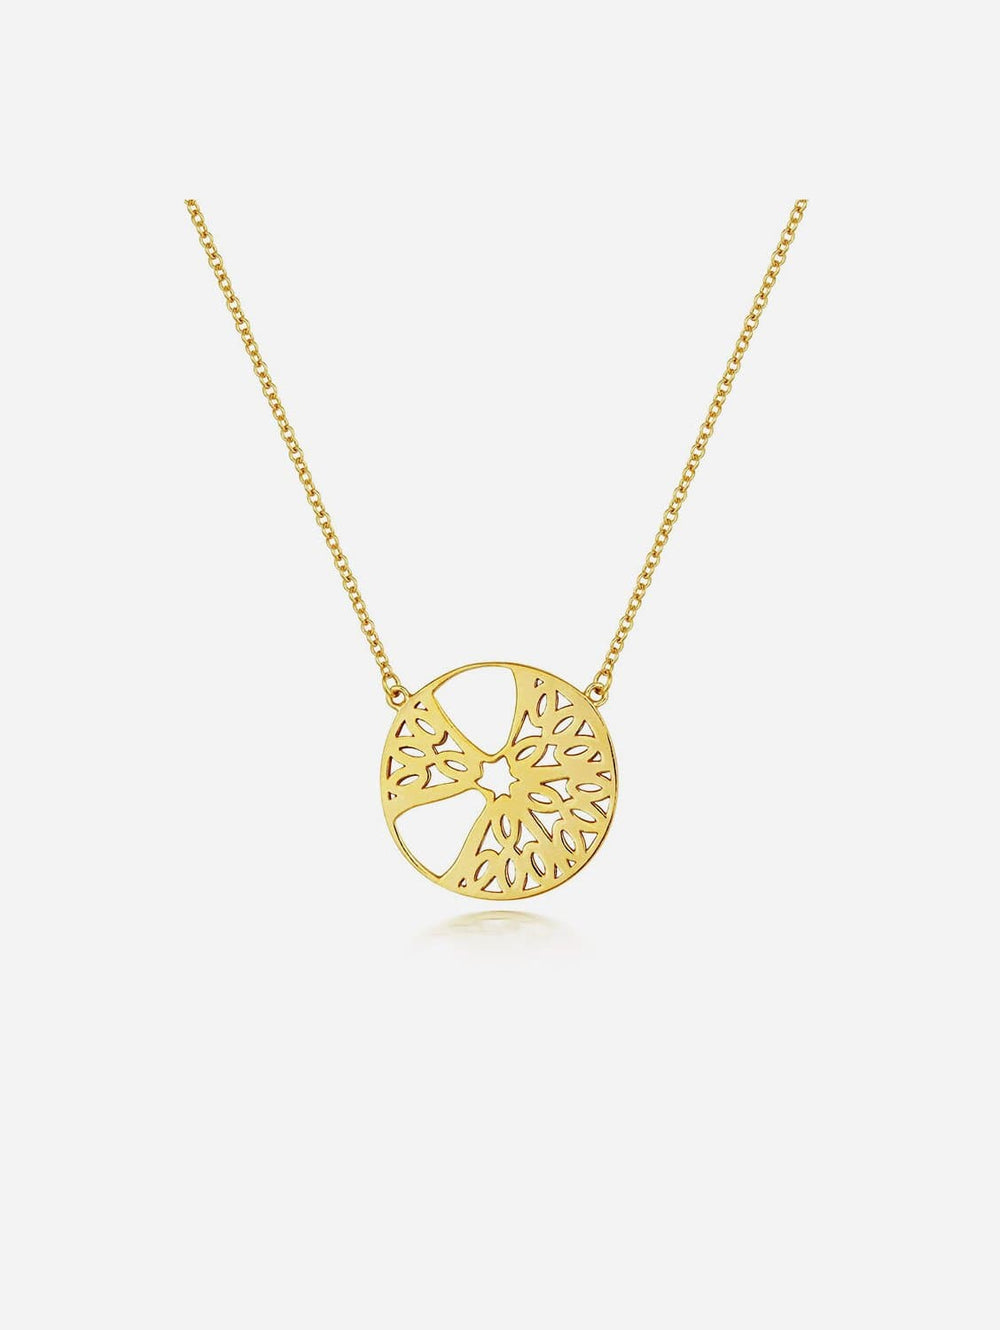 Seville 925 Sterling Silver Segment Pendant | 24ct Gold Plated